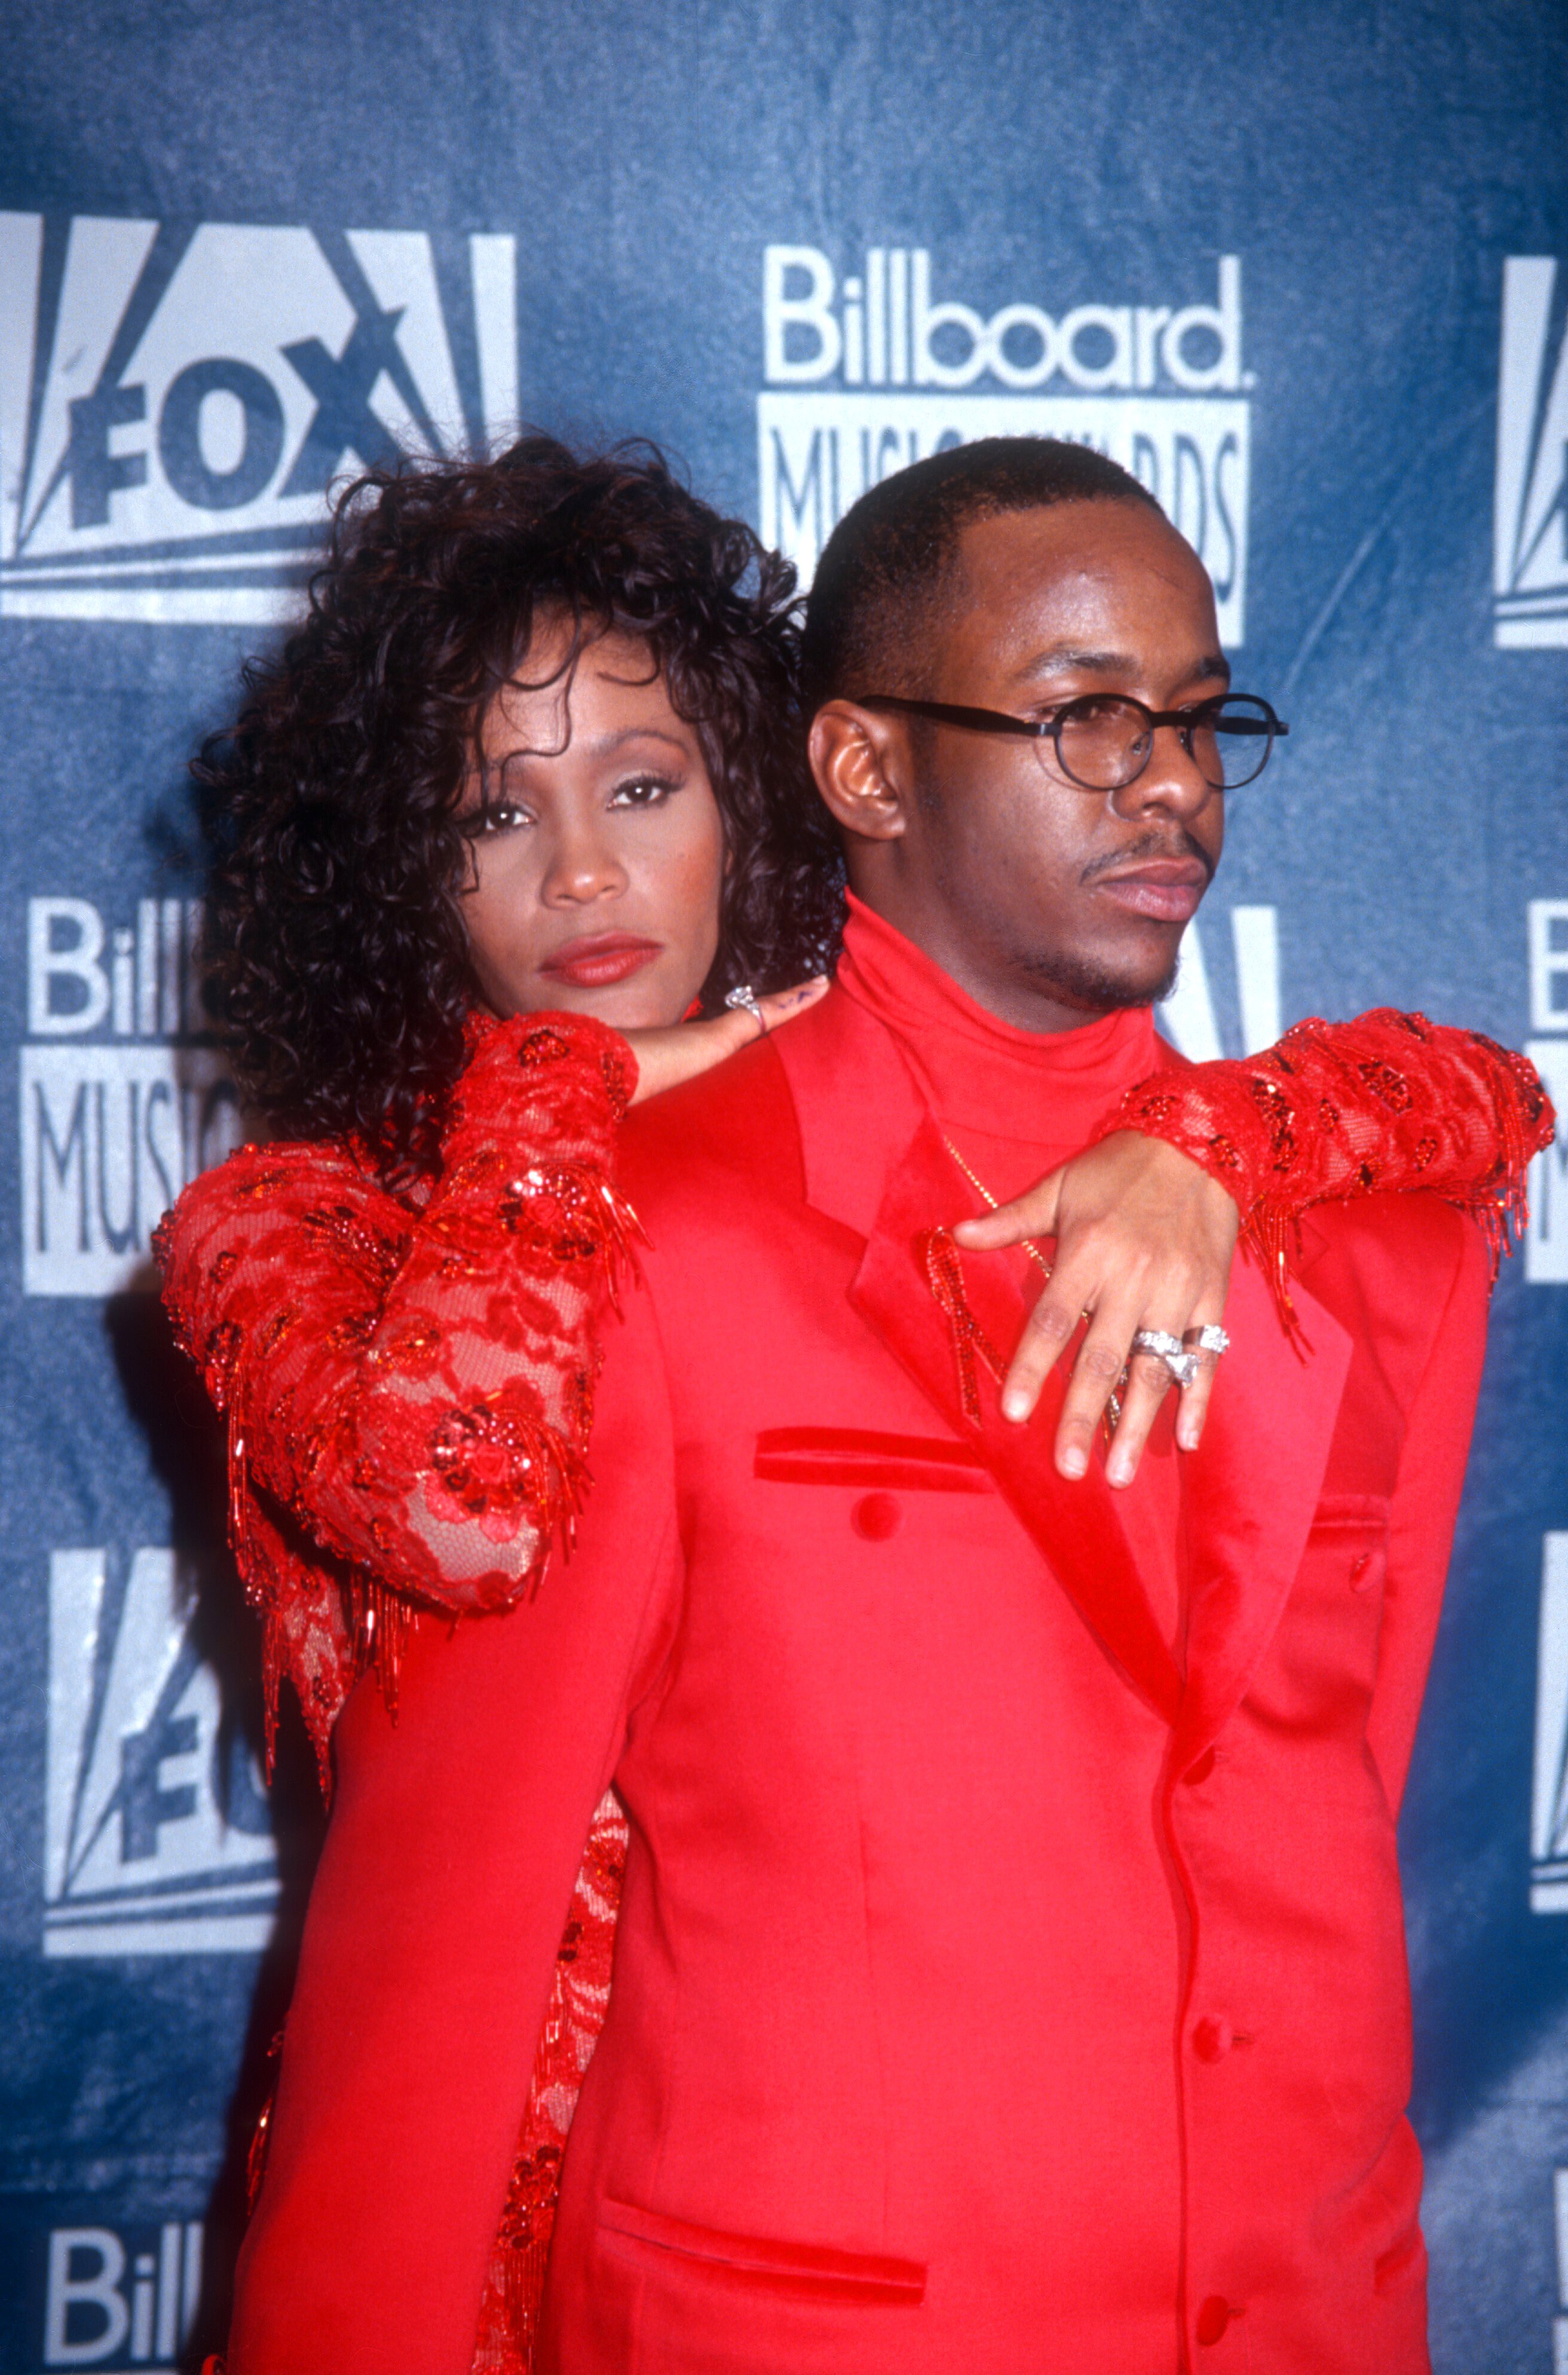 Bobby Brown and Whitney Houston at the 1993 Billboard Music Awards at the Universal Amphitheater, California | Photo: Getty Images